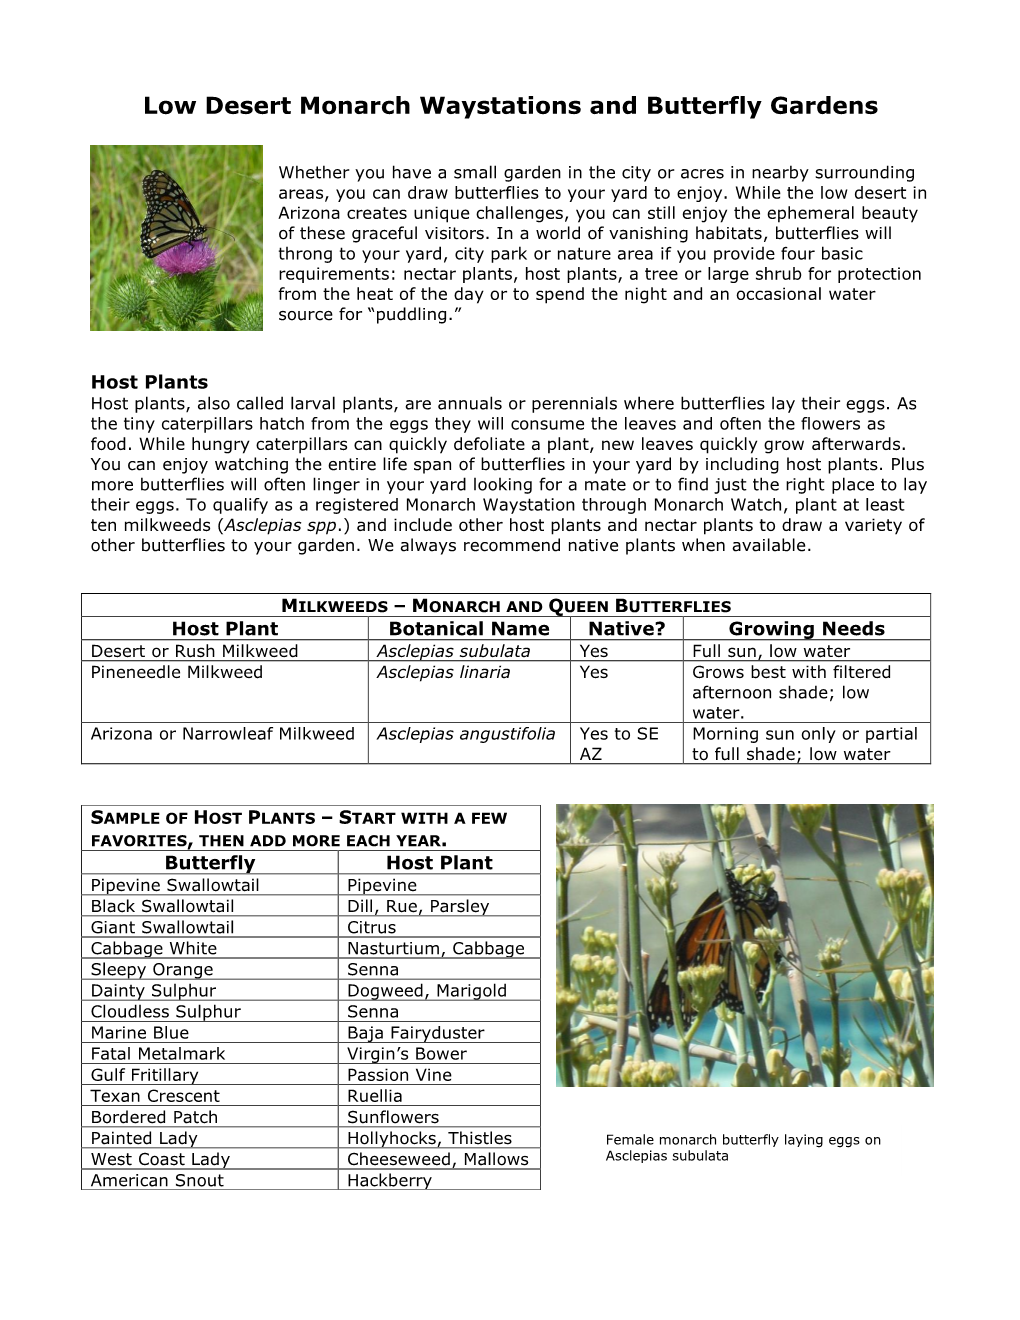 Low Desert Monarch Waystations and Butterfly Gardens